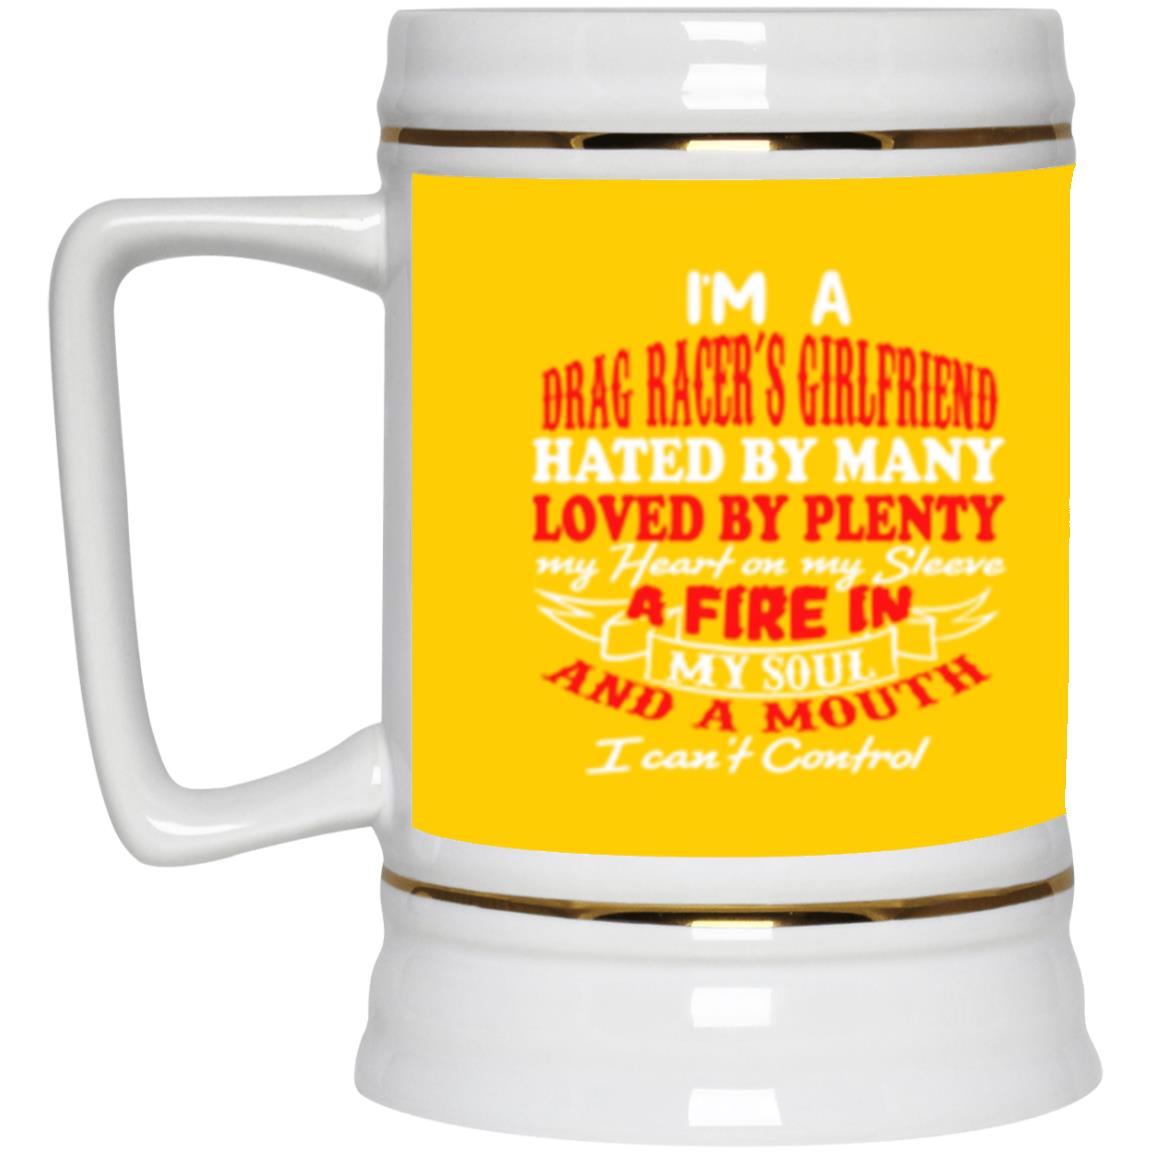 I'm A Drag Racer's Girlfriend Hated By Many Loved By Plenty Beer Stein 22oz.